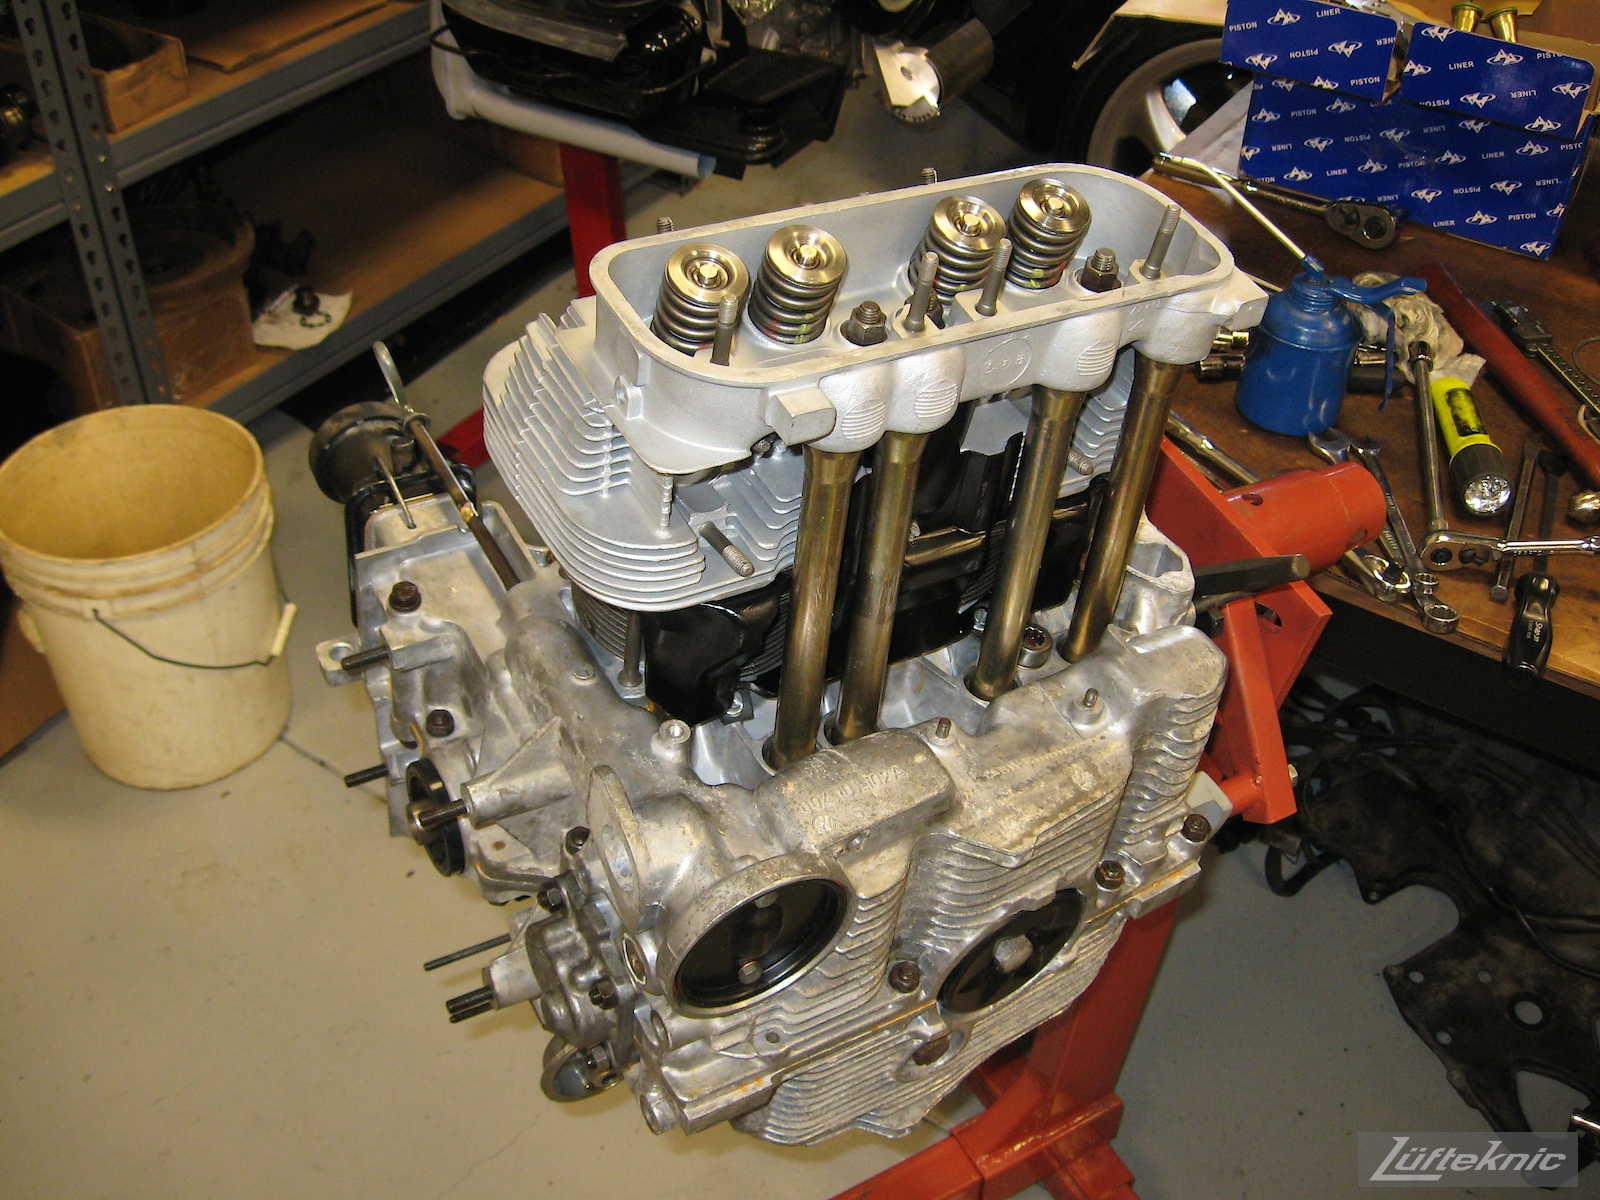 Nearly complete engine for a restored yellow Porsche 914 at Lufteknic.